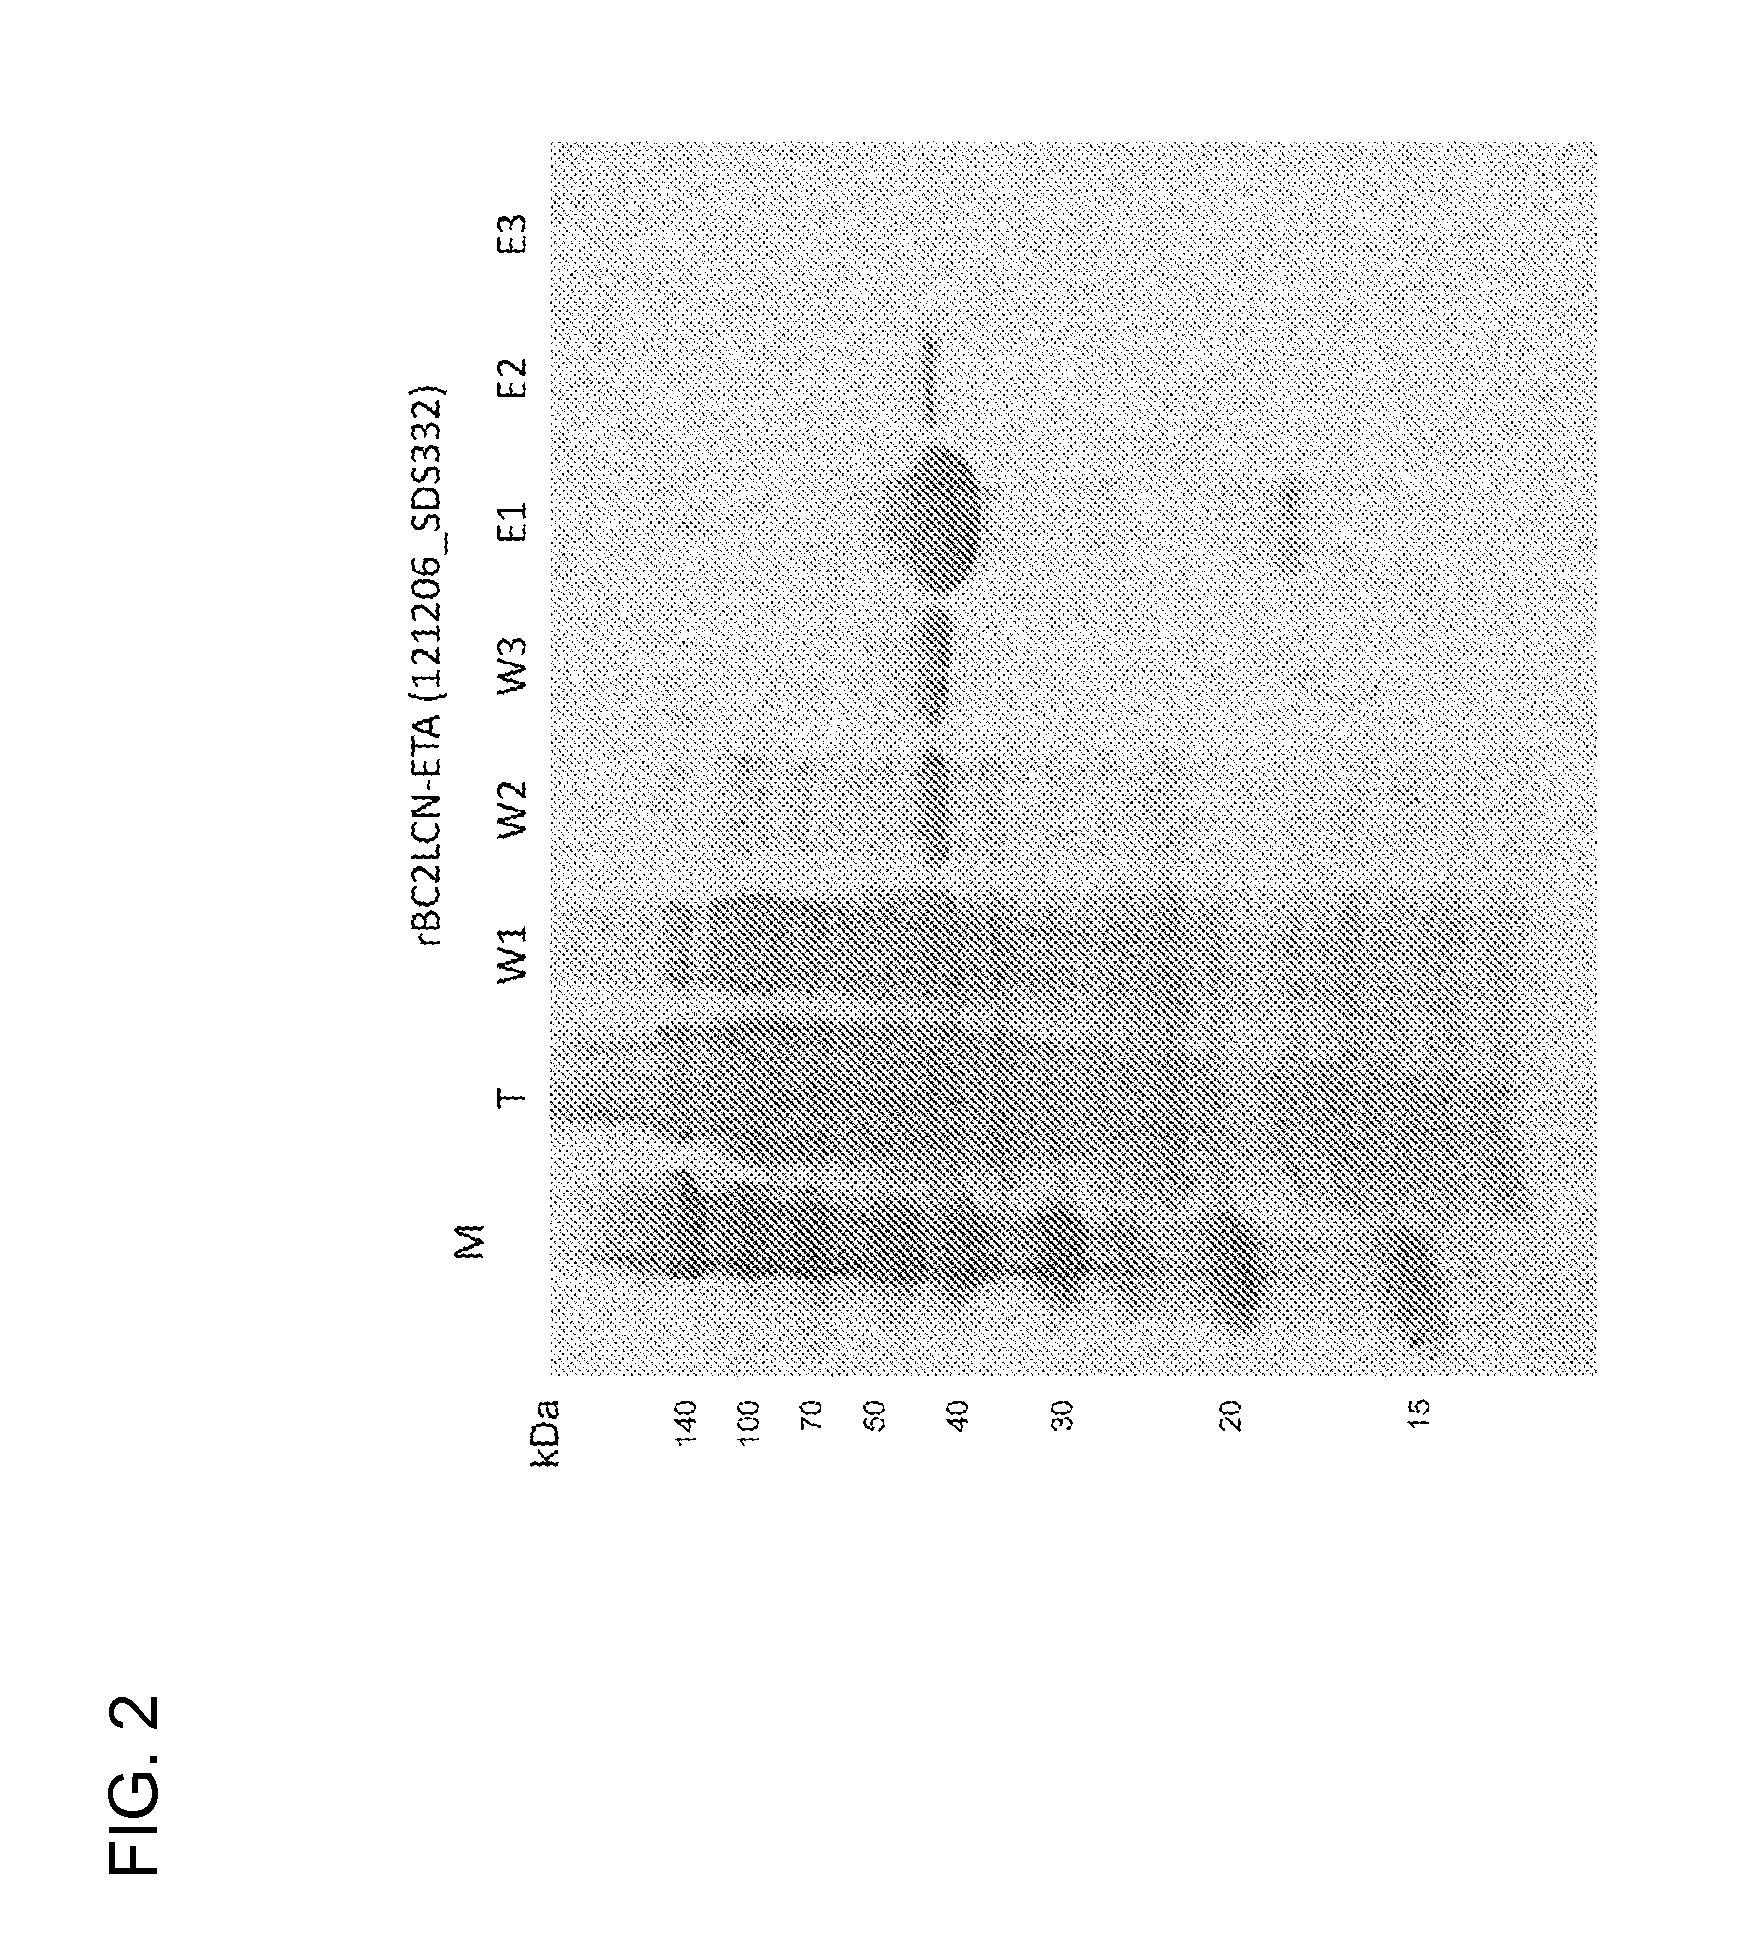 Undifferentiated cell elimination method